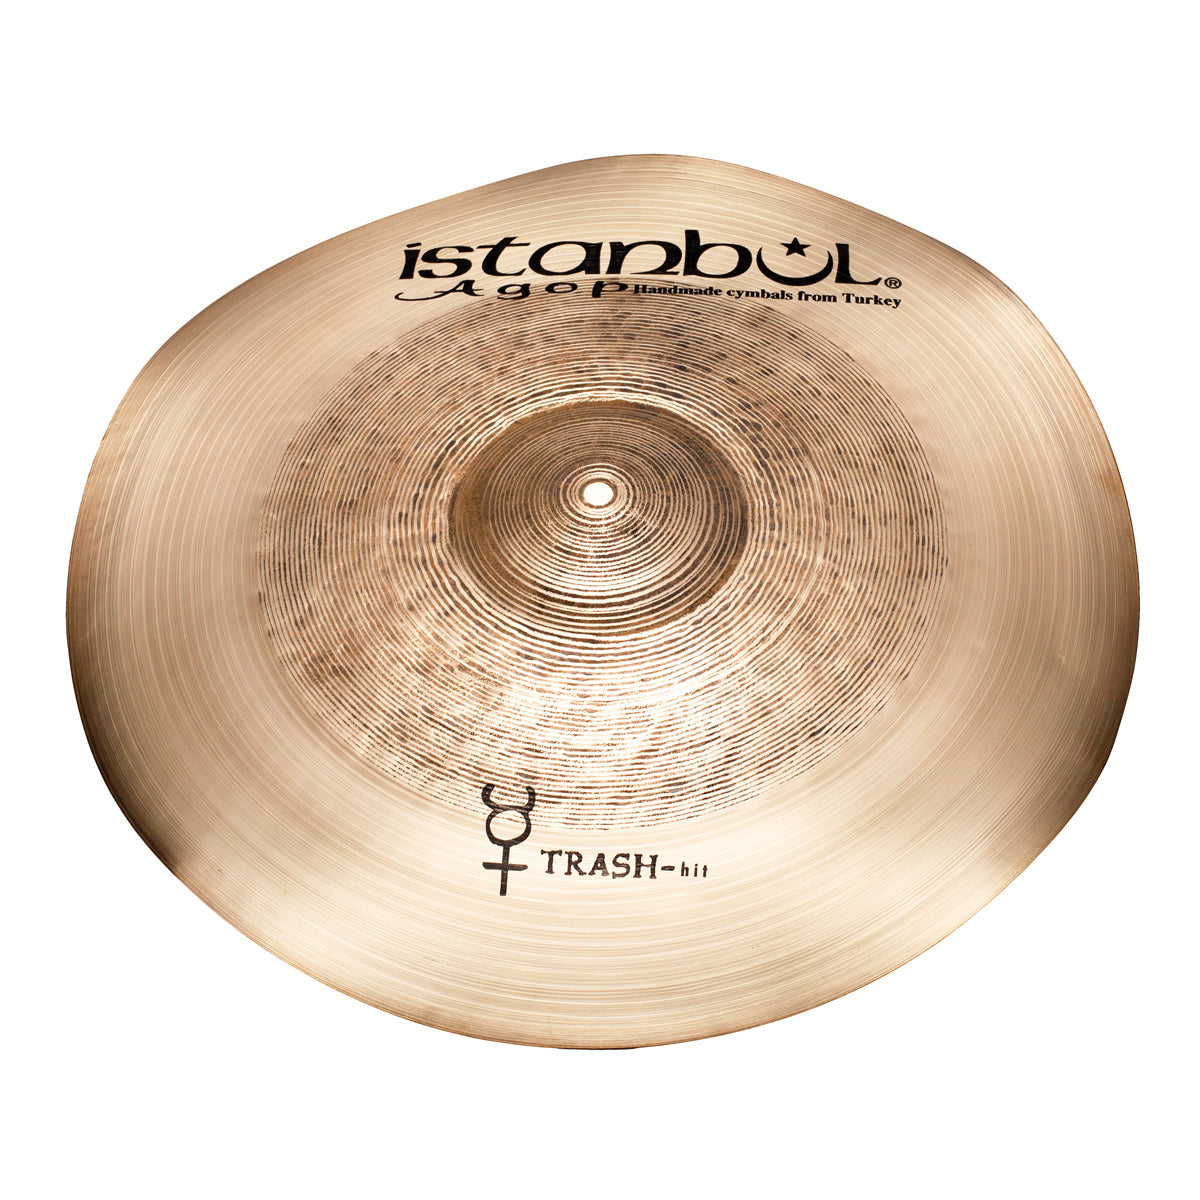 Istanbul Agop Traditional 18" Trash Hit